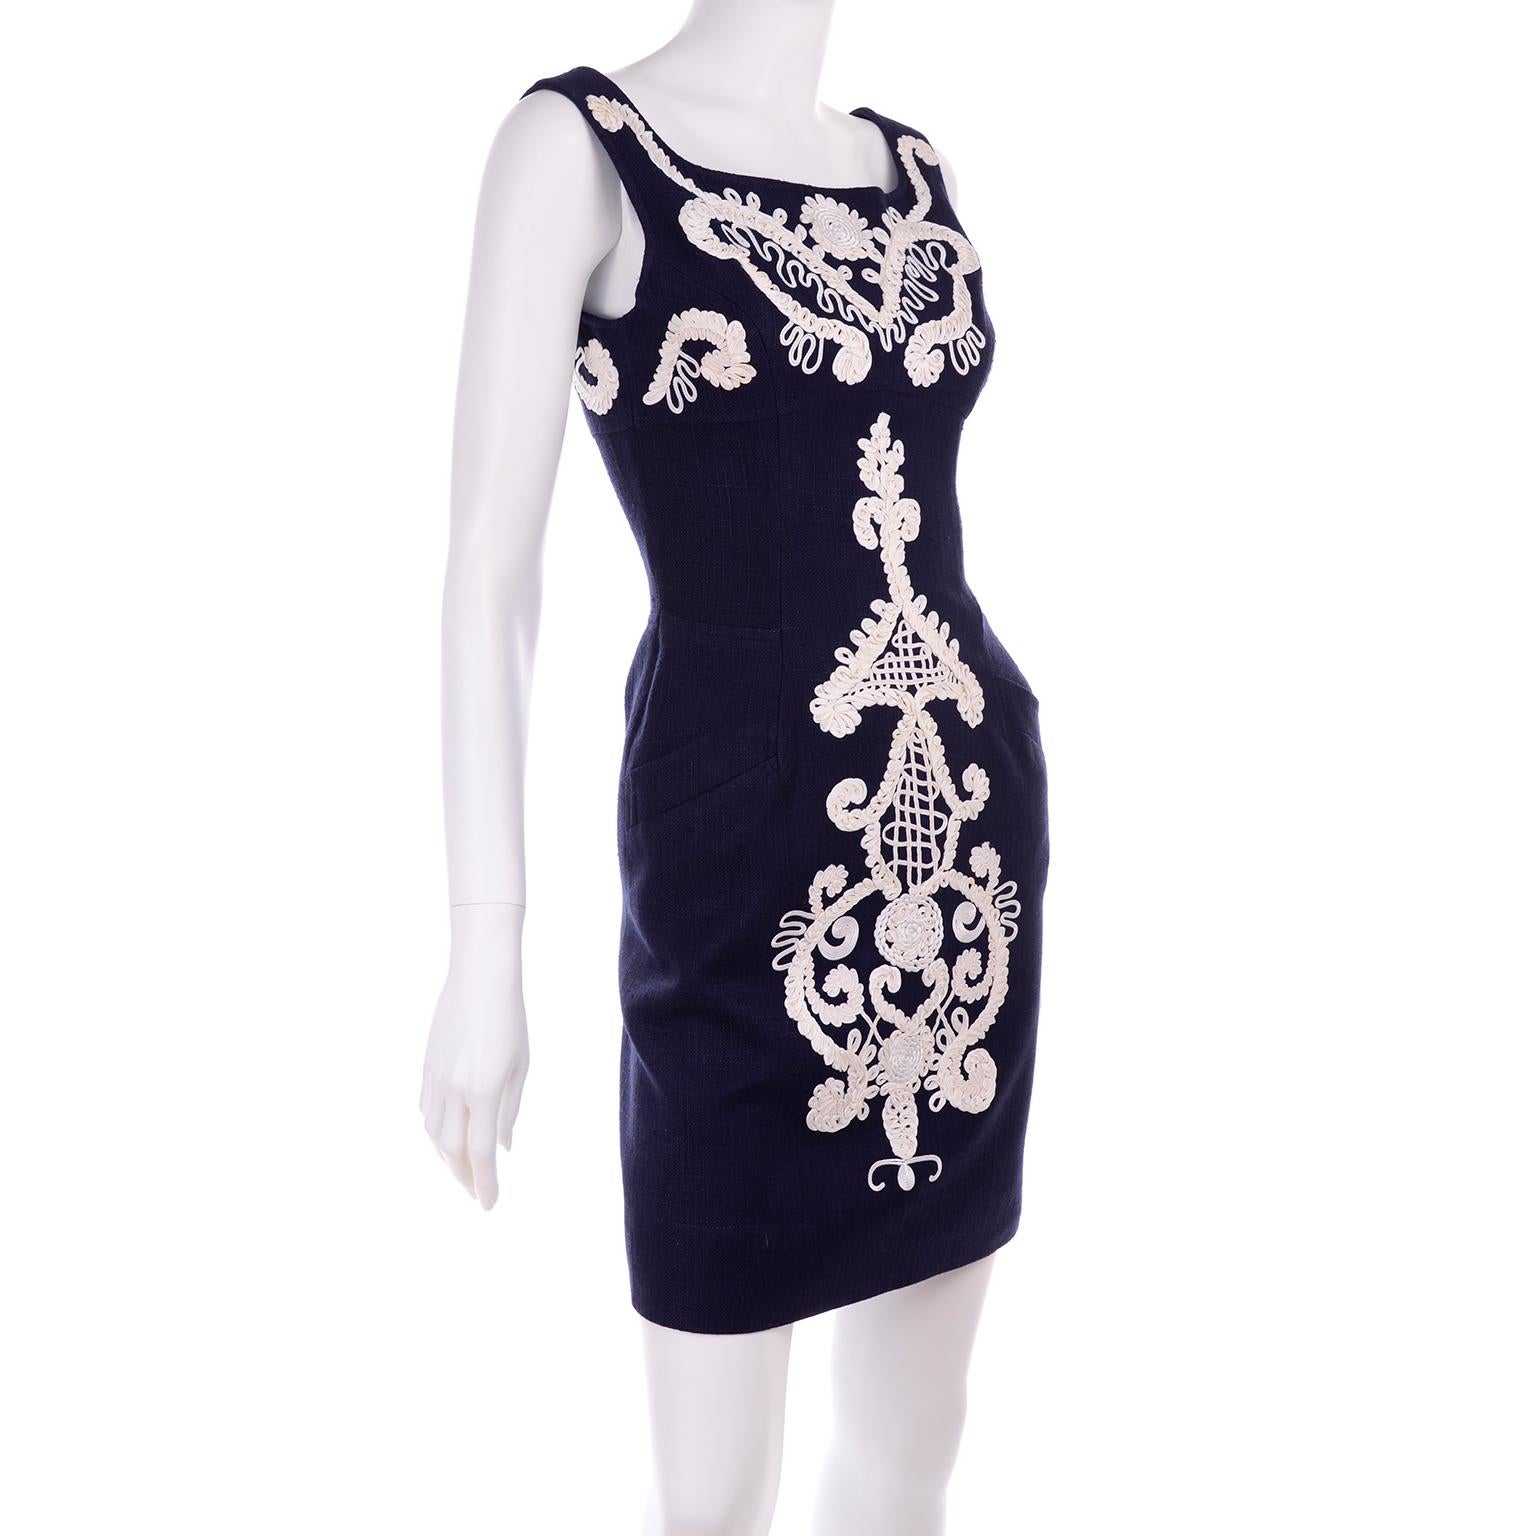 1993 Christian Lacroix Vintage Midnight Blue Dress W/ White Soutache Embroidery In Excellent Condition For Sale In Portland, OR